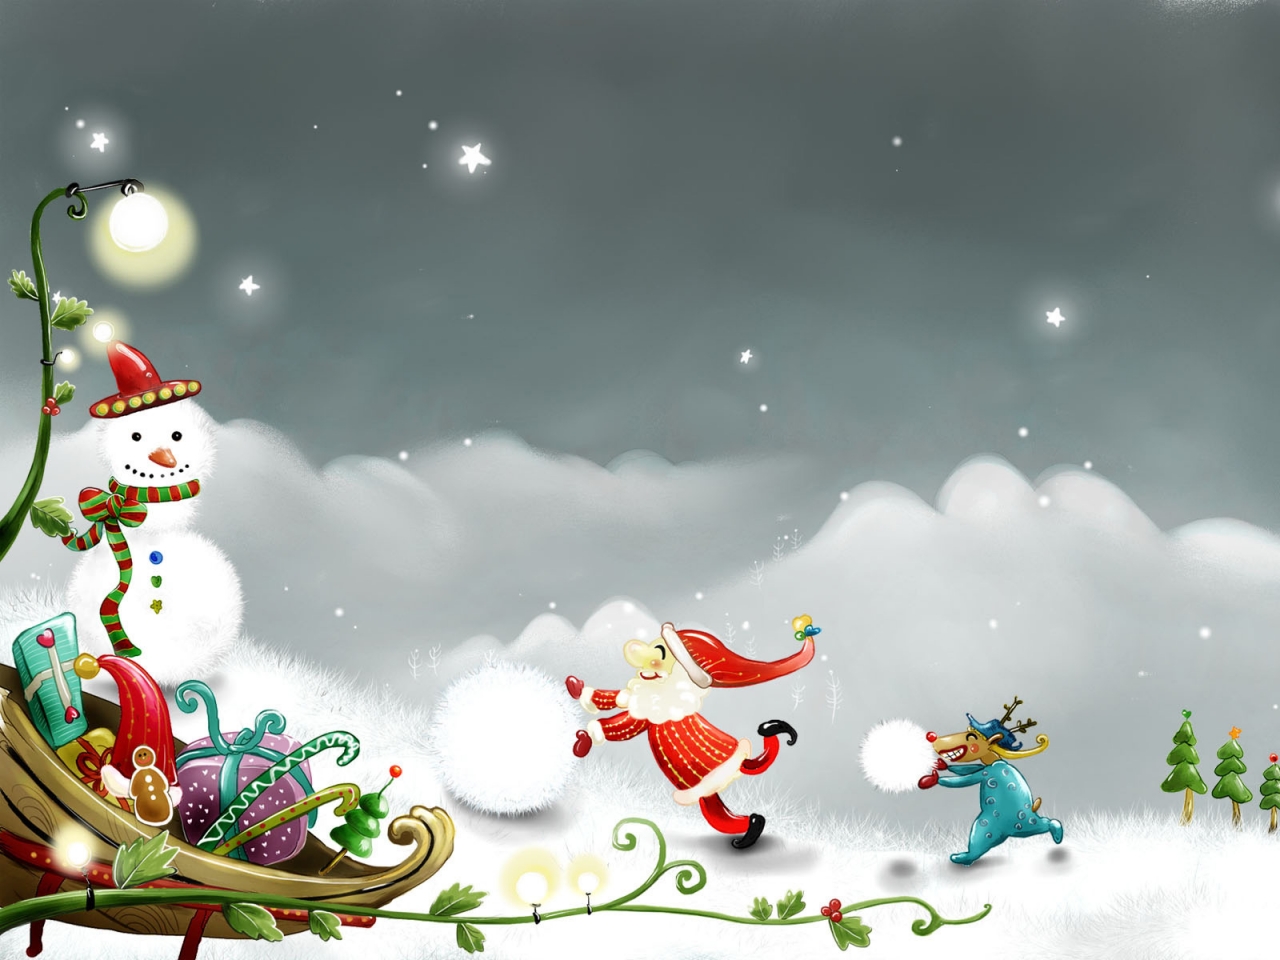 Snowman and Santa Claus for 1280 x 960 resolution